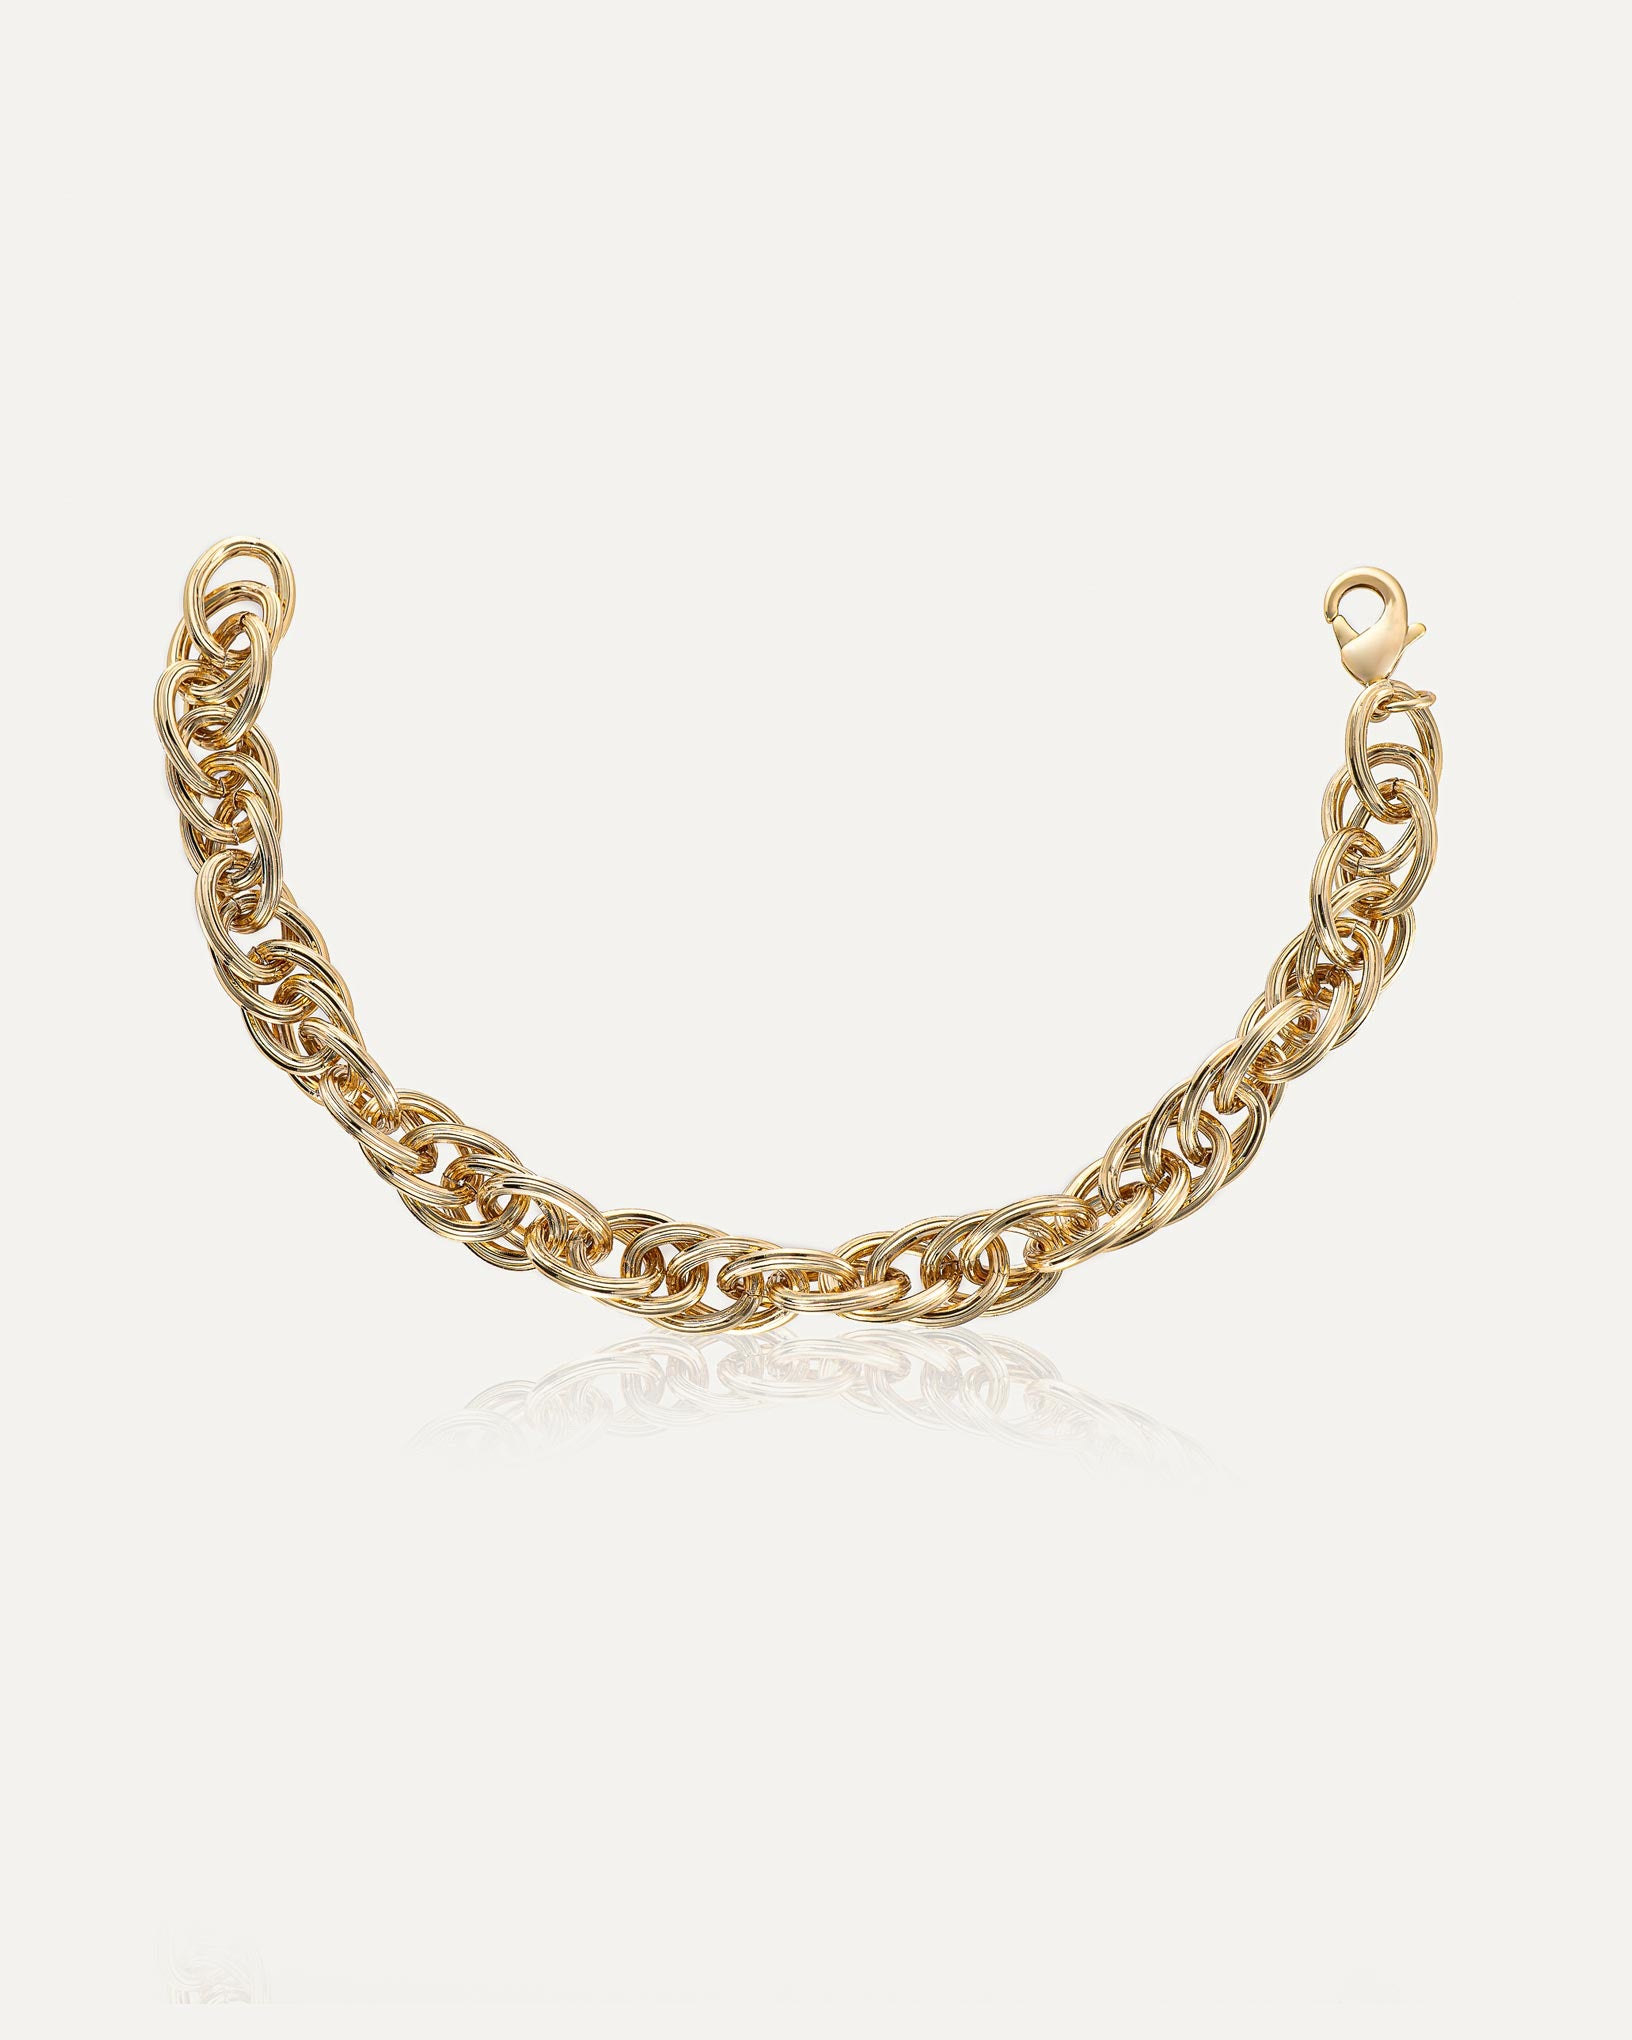 Ollie Chunky Chain Gold Bracelet <p> (US$63 after discount)